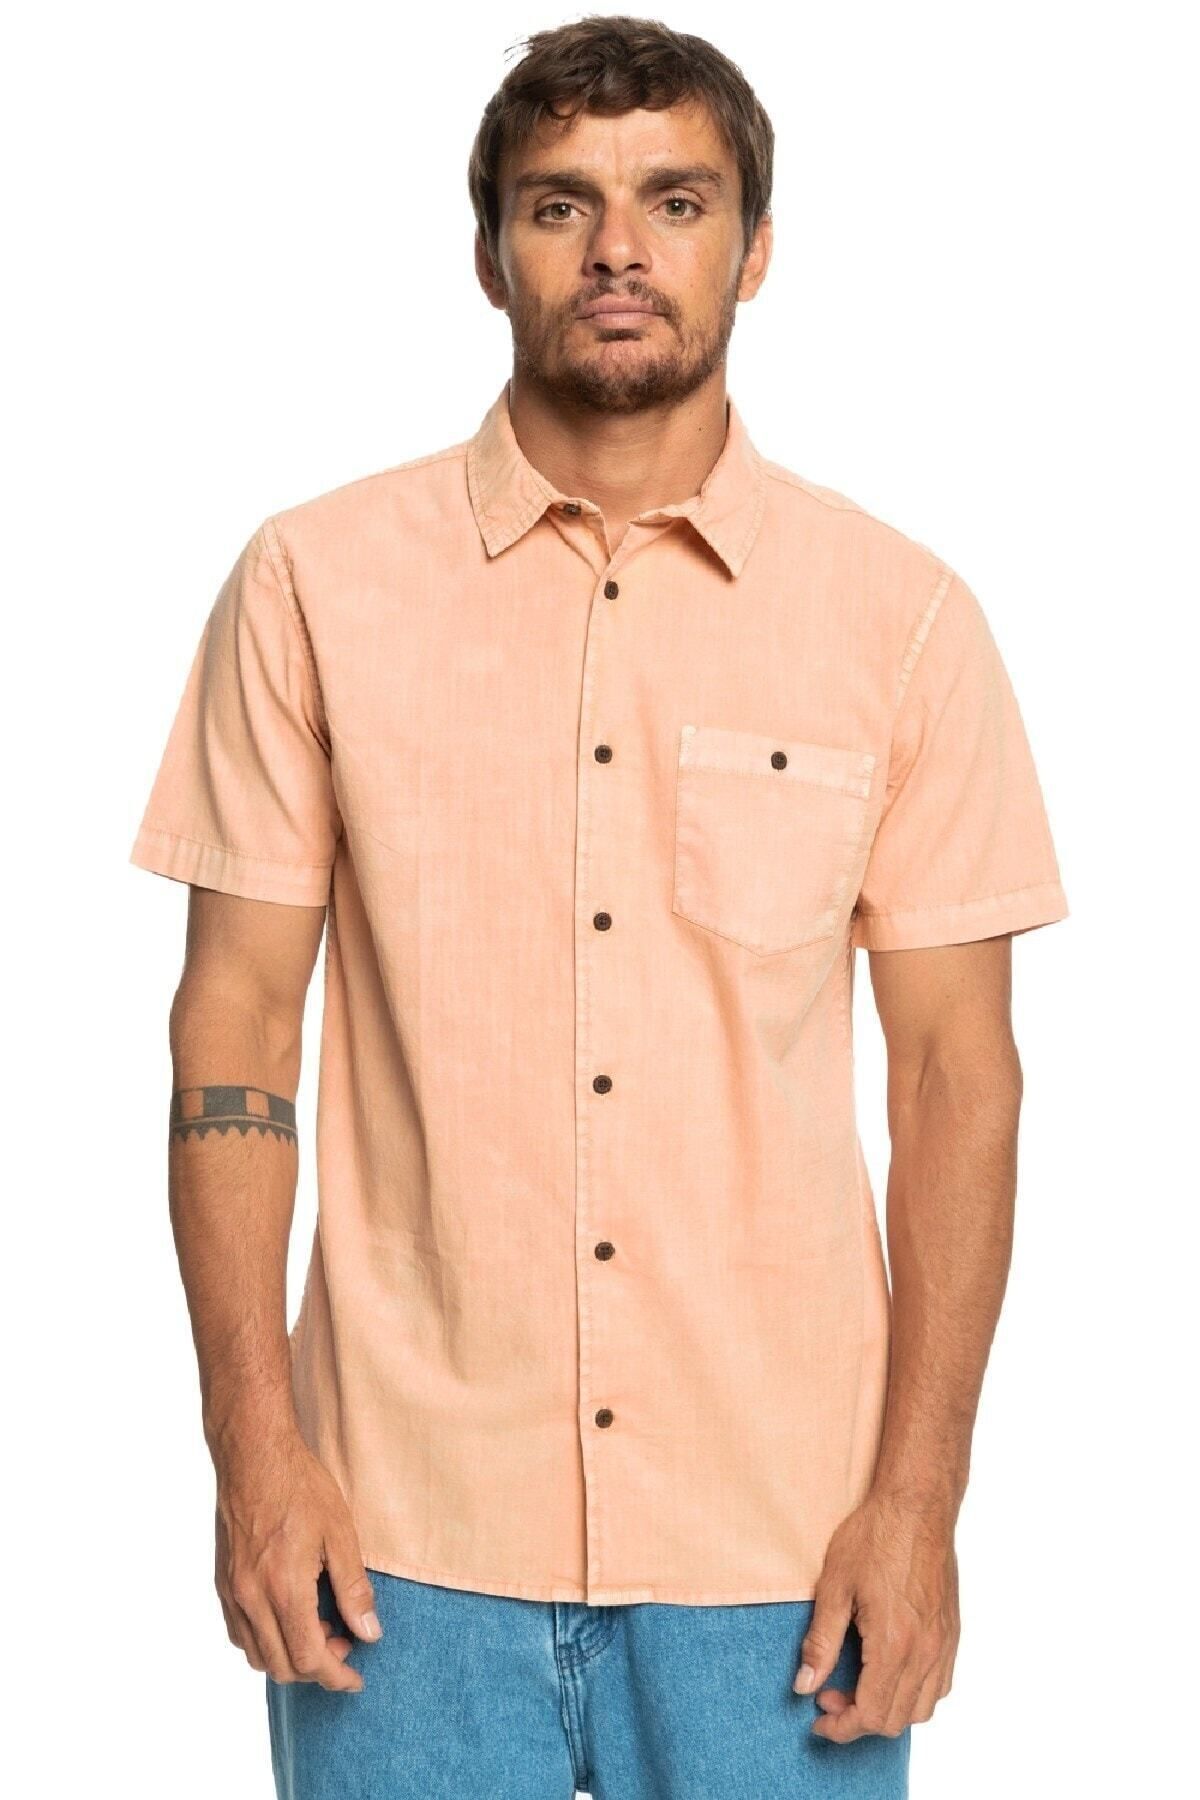 Quiksilver Bolam M Wvtp